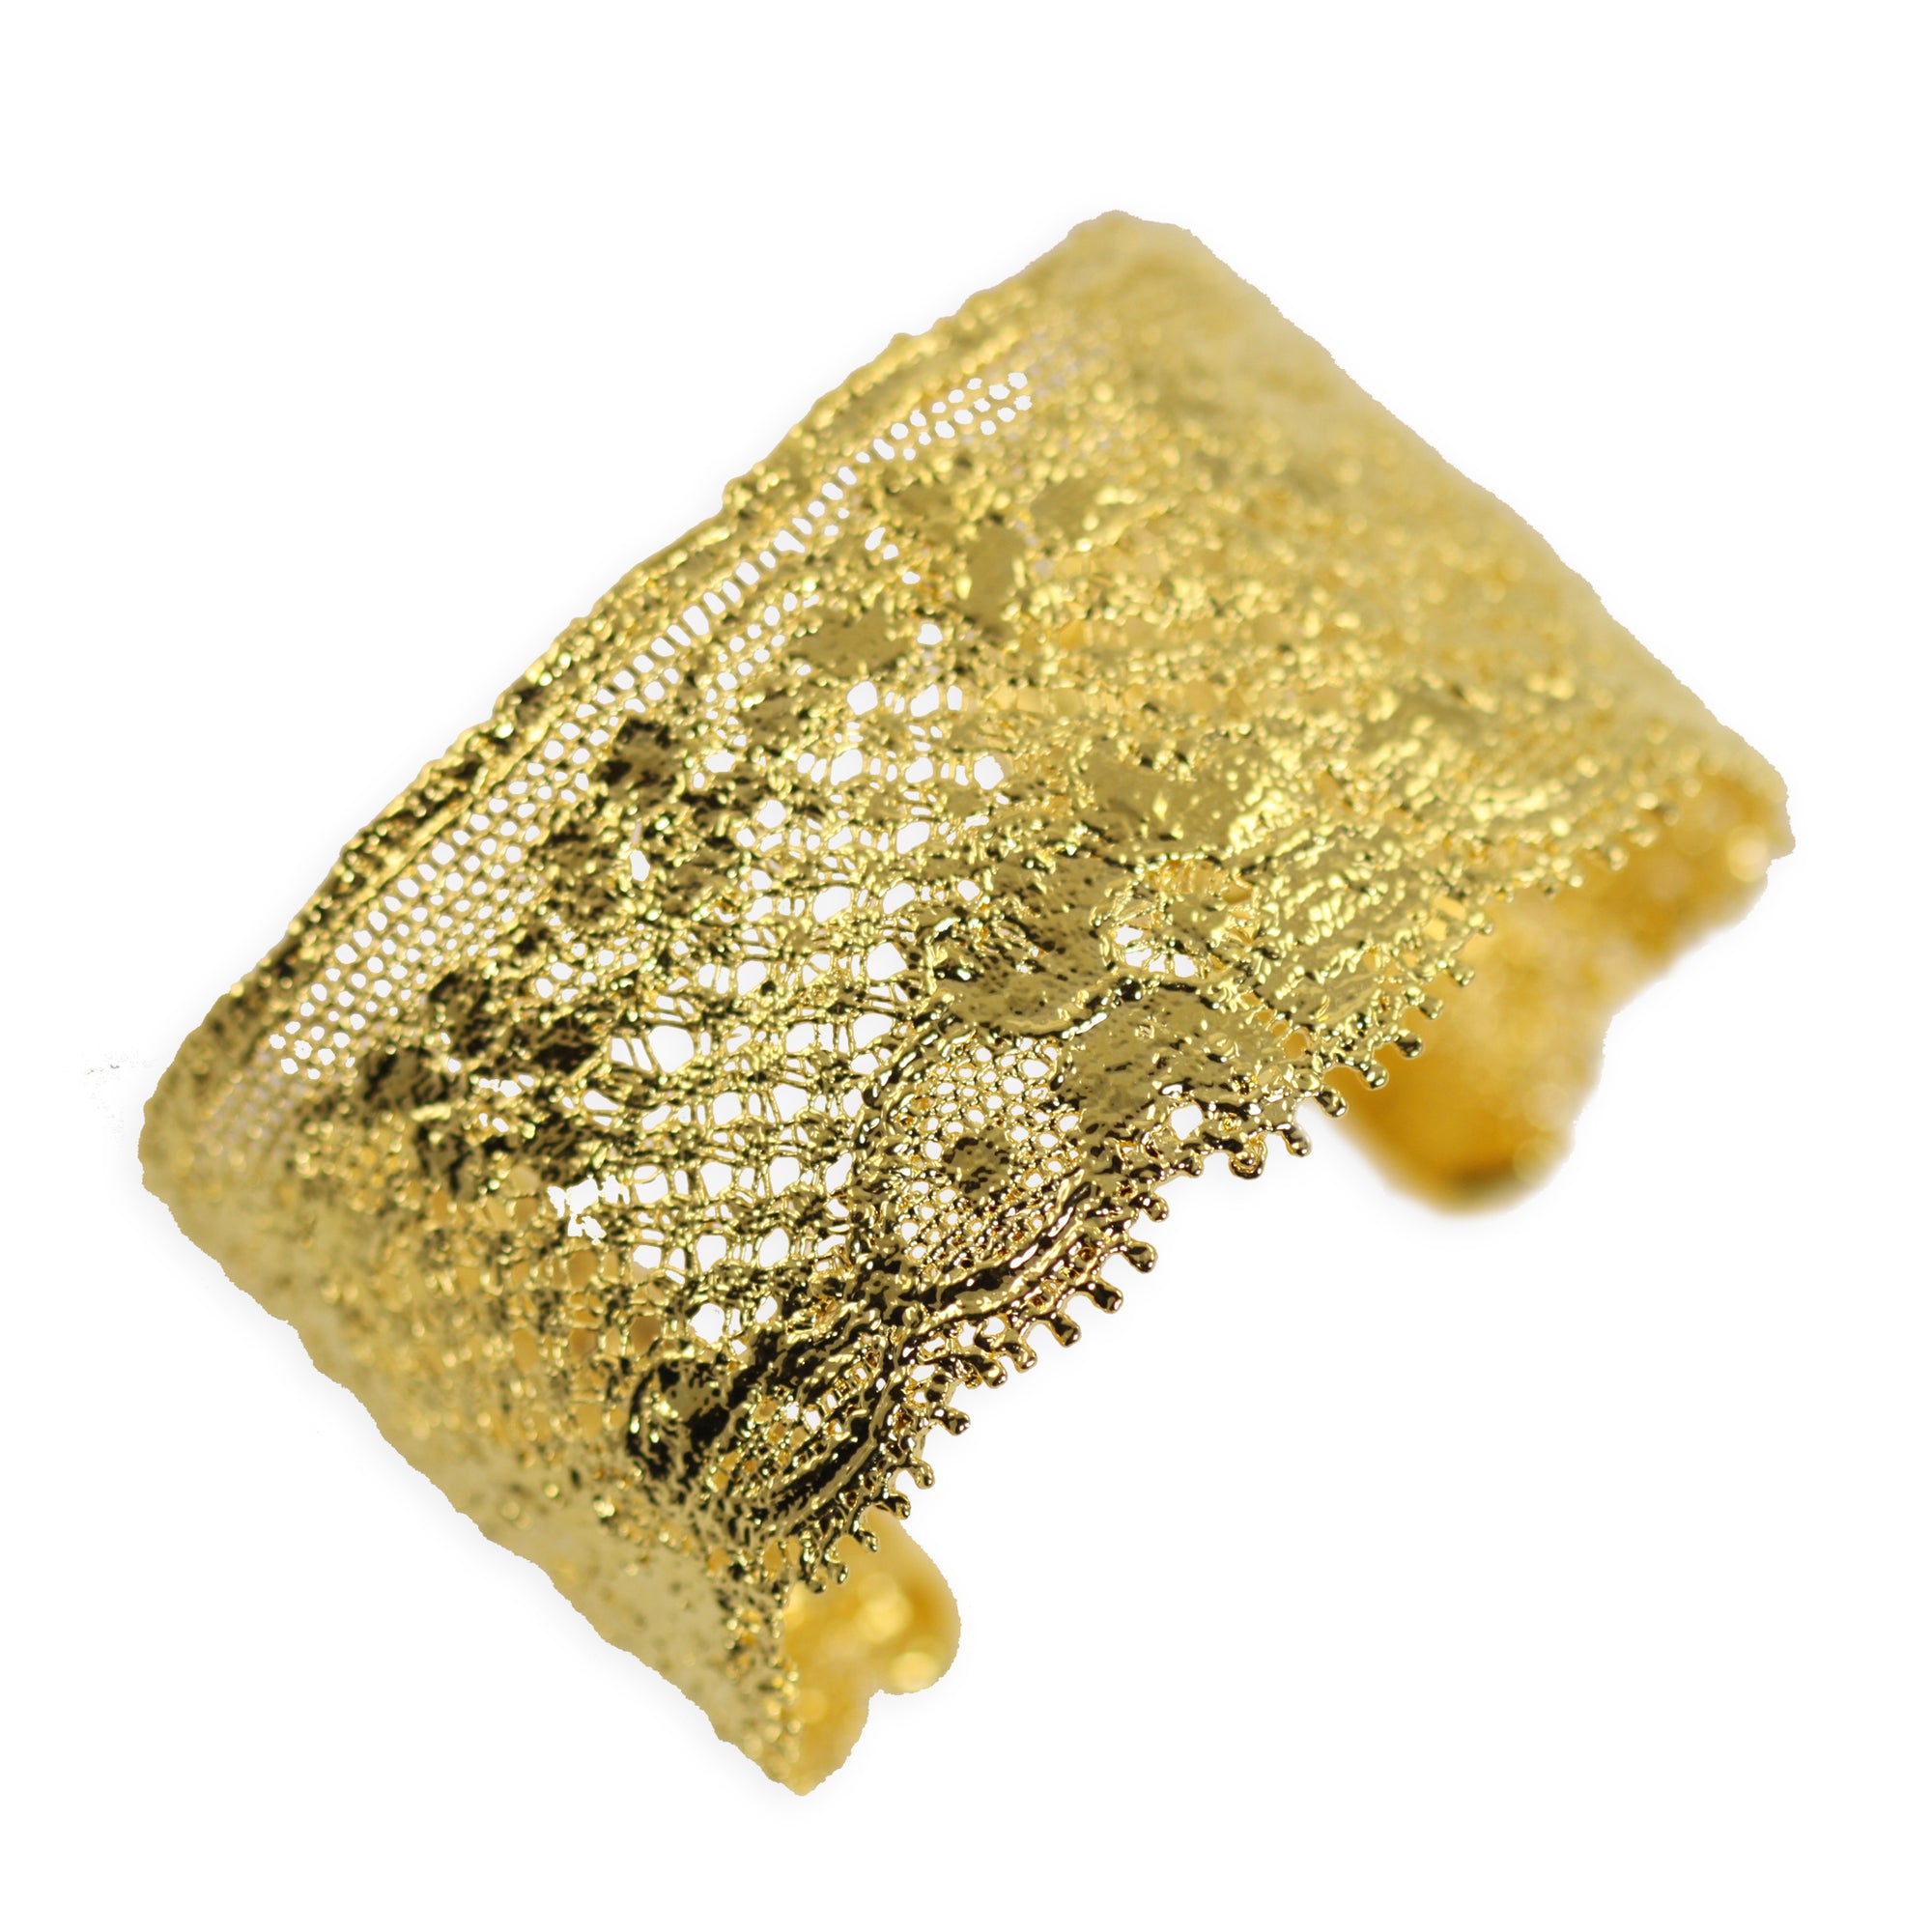 Gorgeous cuff bracelet made from French lace dipped in 24k gold, signed and numbered inside.